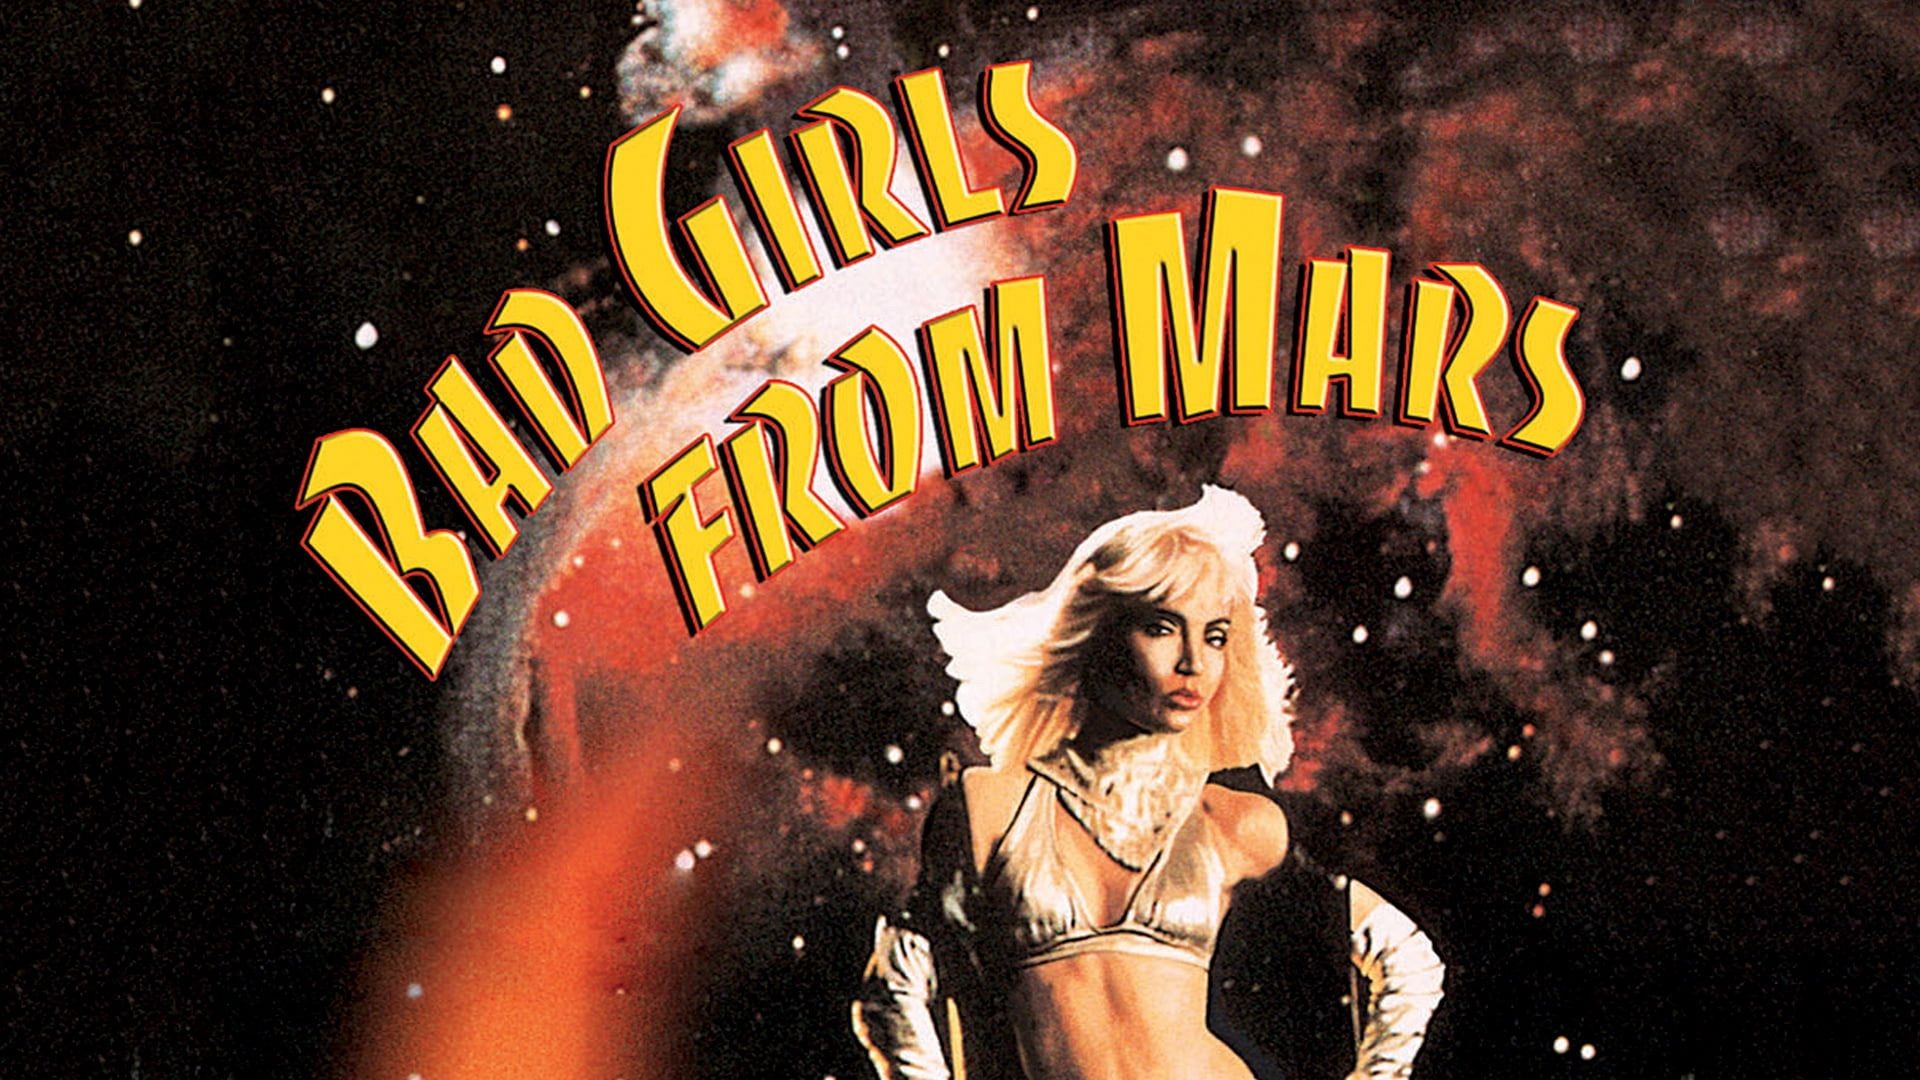 Bad Girls from Mars Backdrop